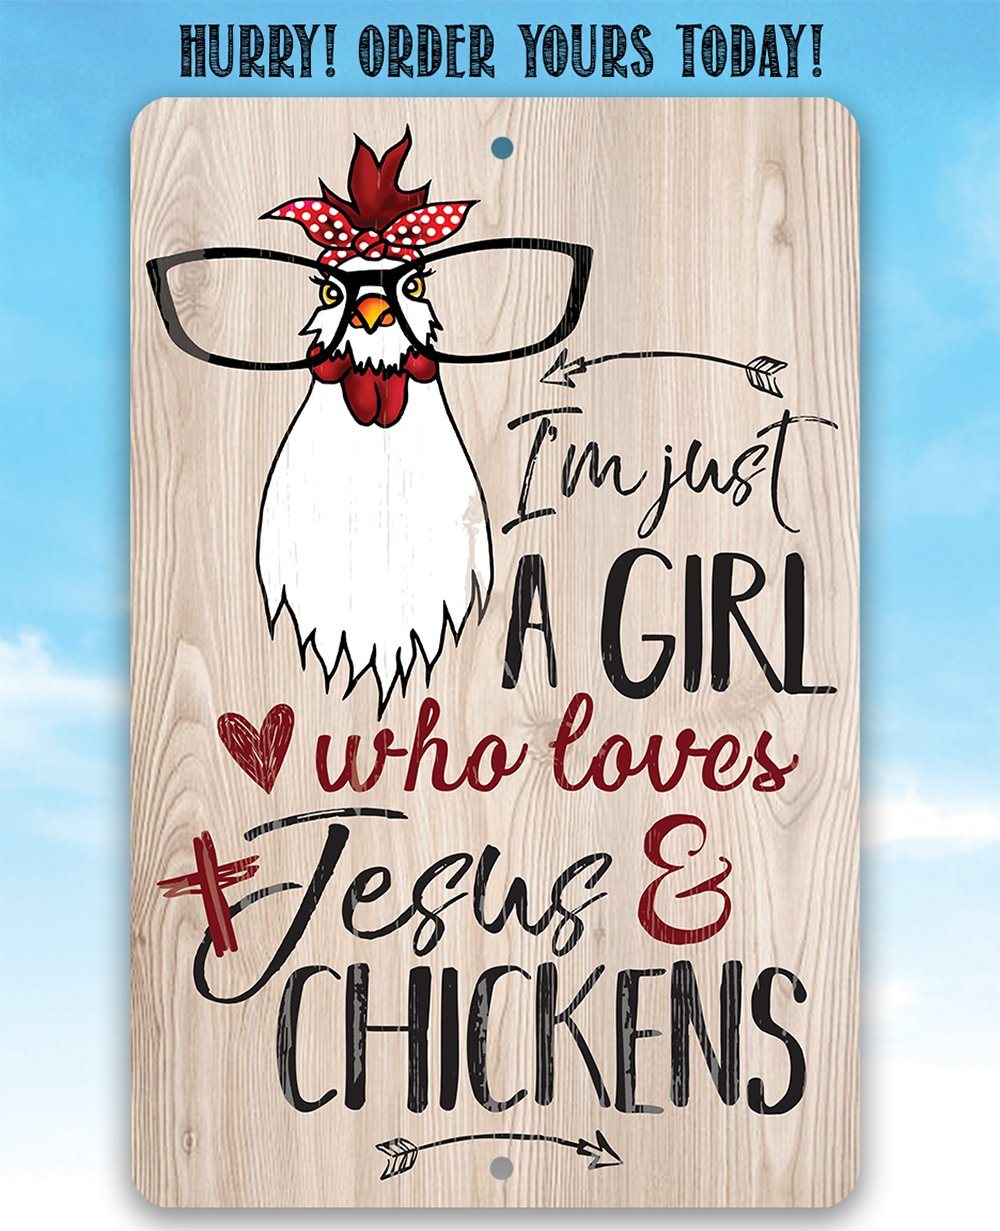 Just A Girl Who Loves Jesus & Chickens - Metal Sign | Lone Star Art.